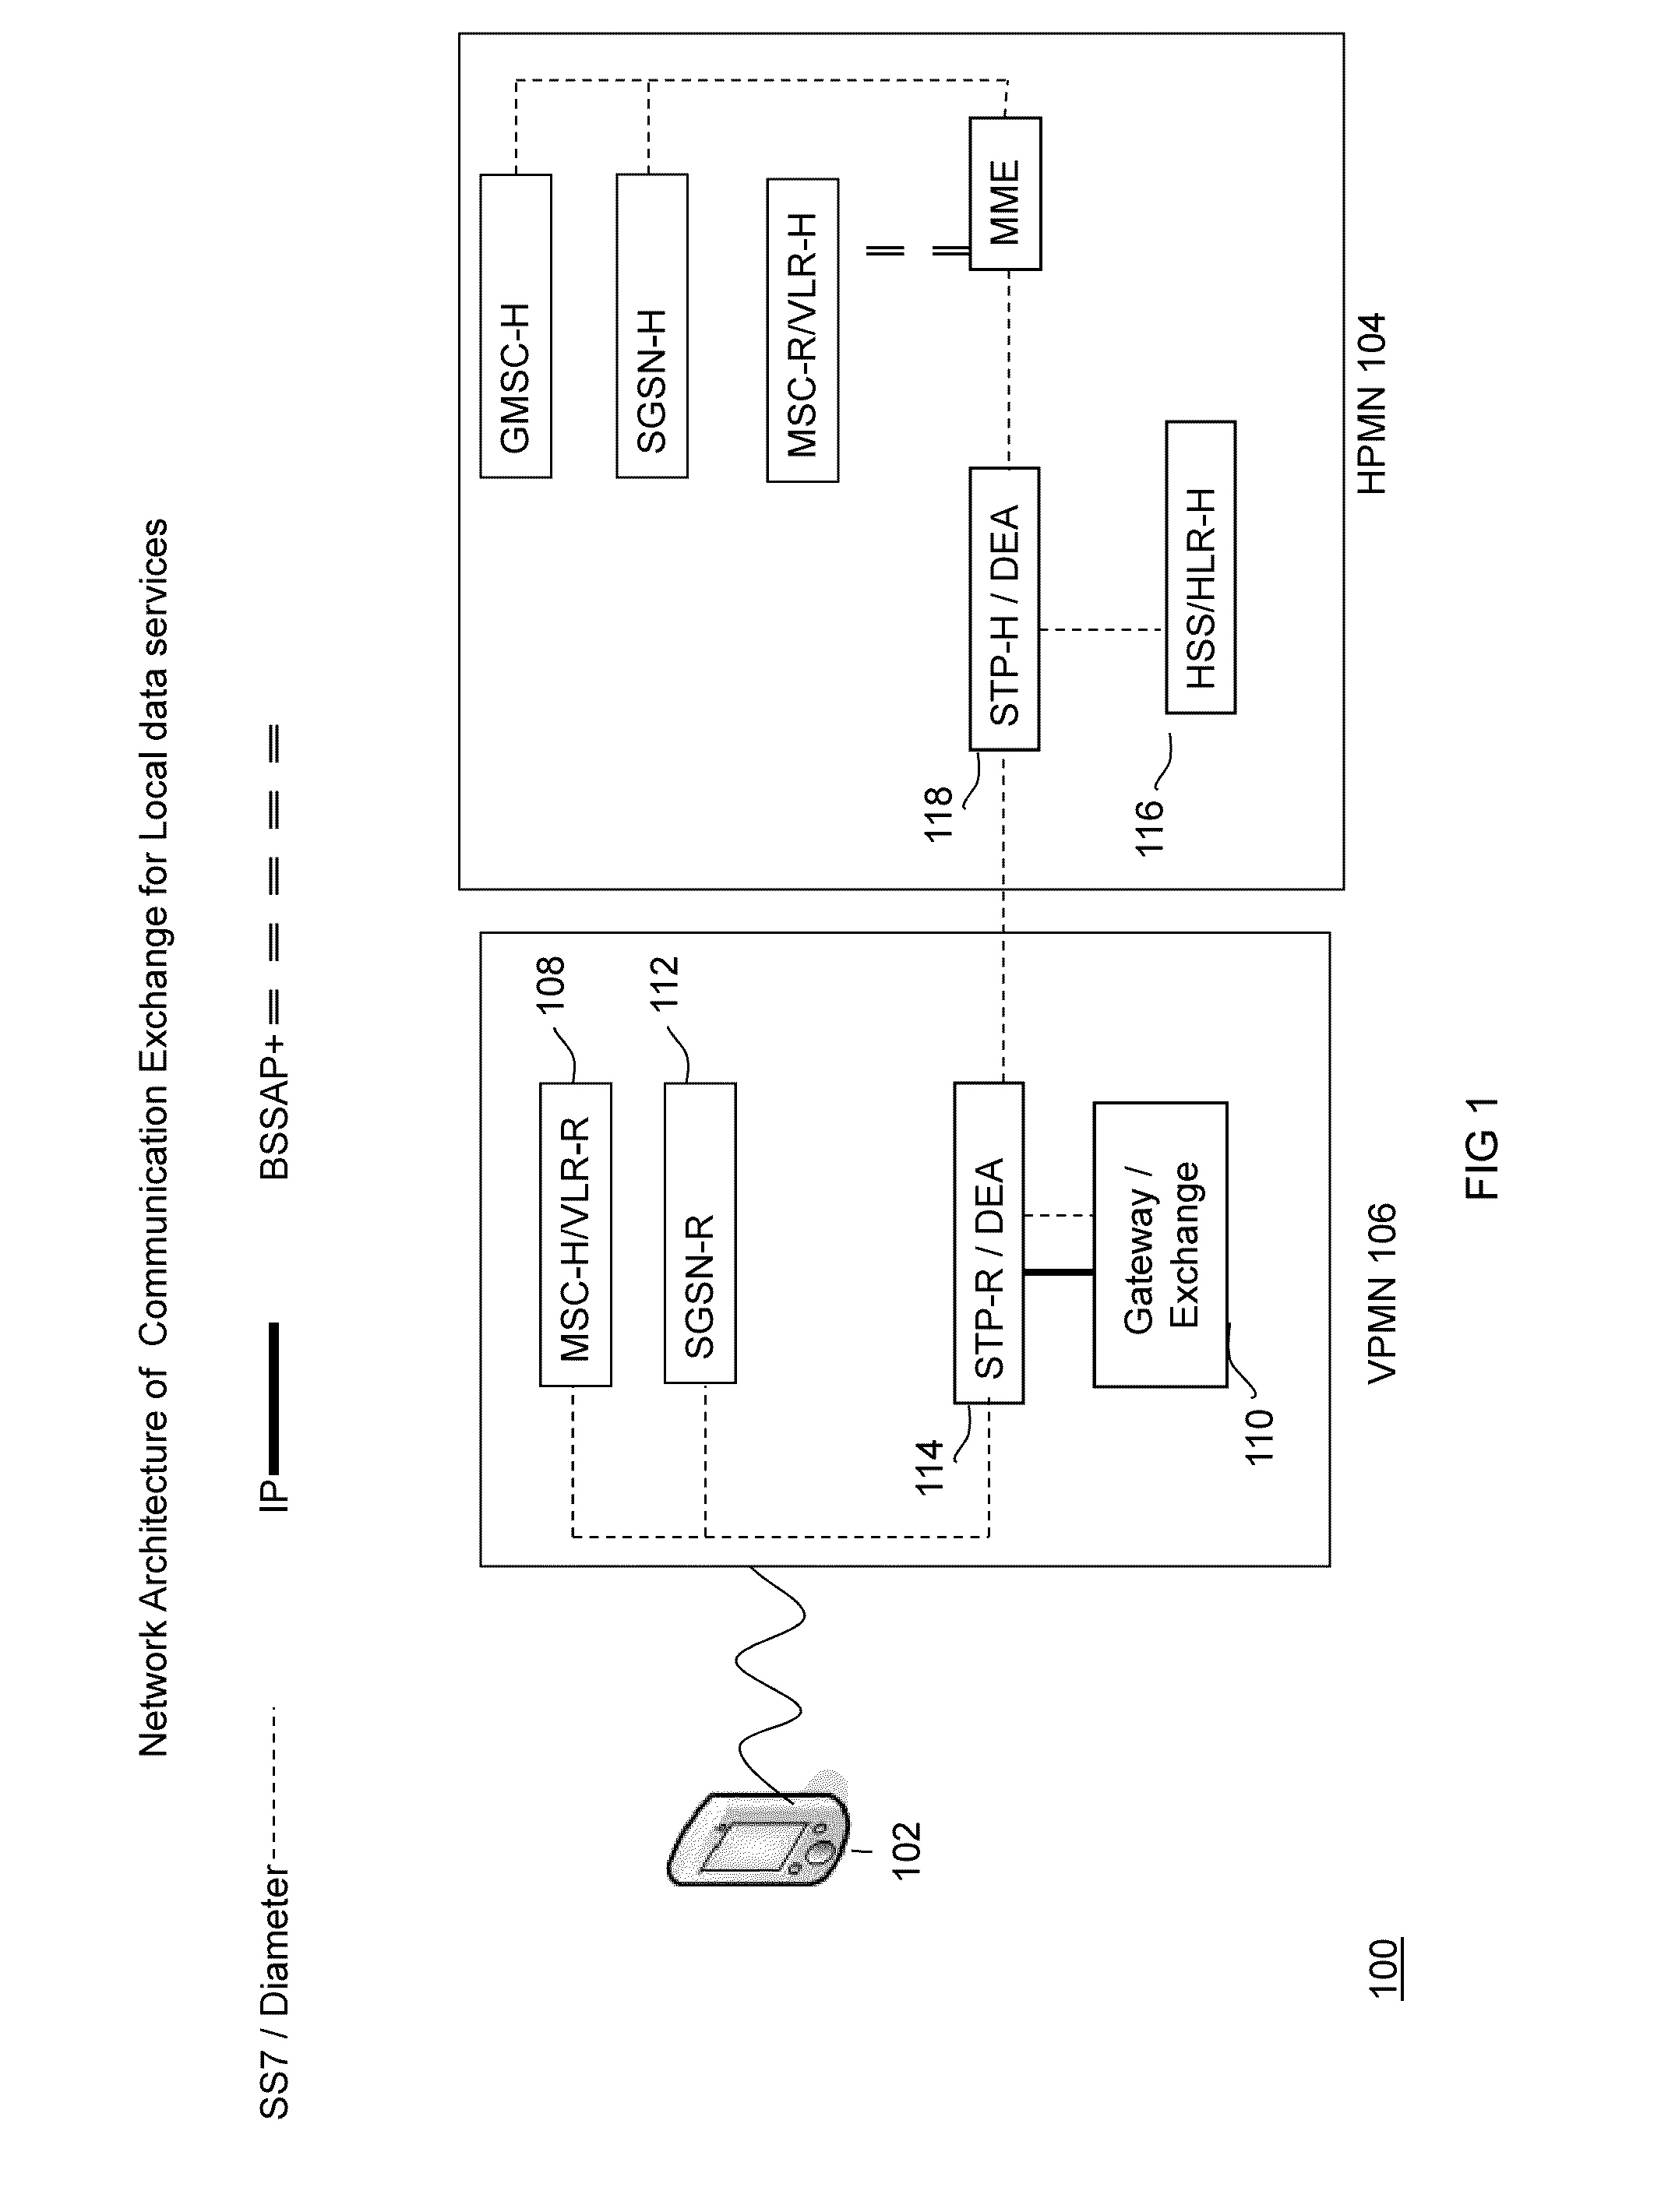 Communication exchange for local data services